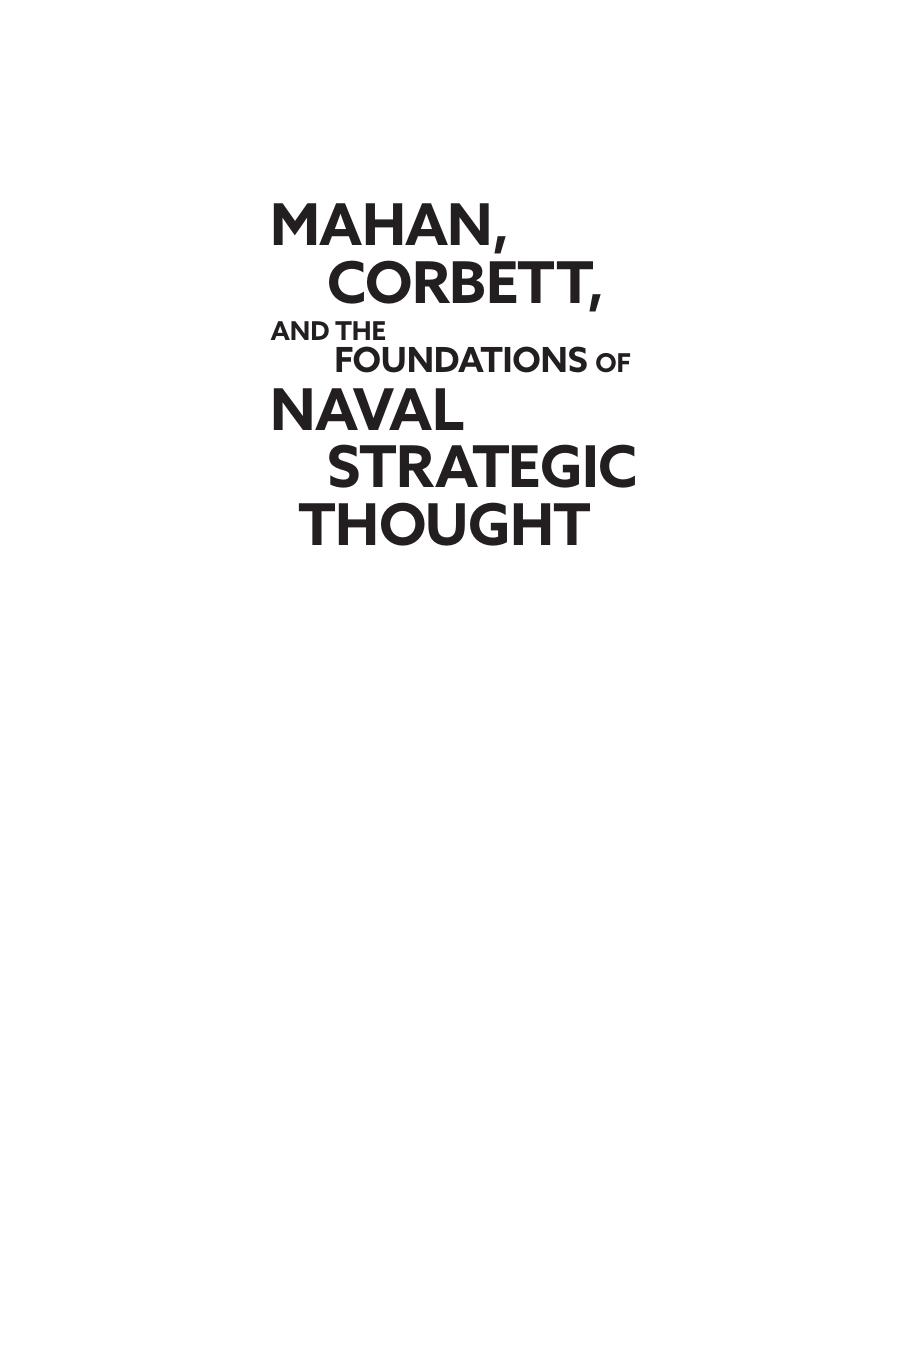 Mahan, Corbett, and the Foundations of Naval Strategic Thought by Kevin D McCranie